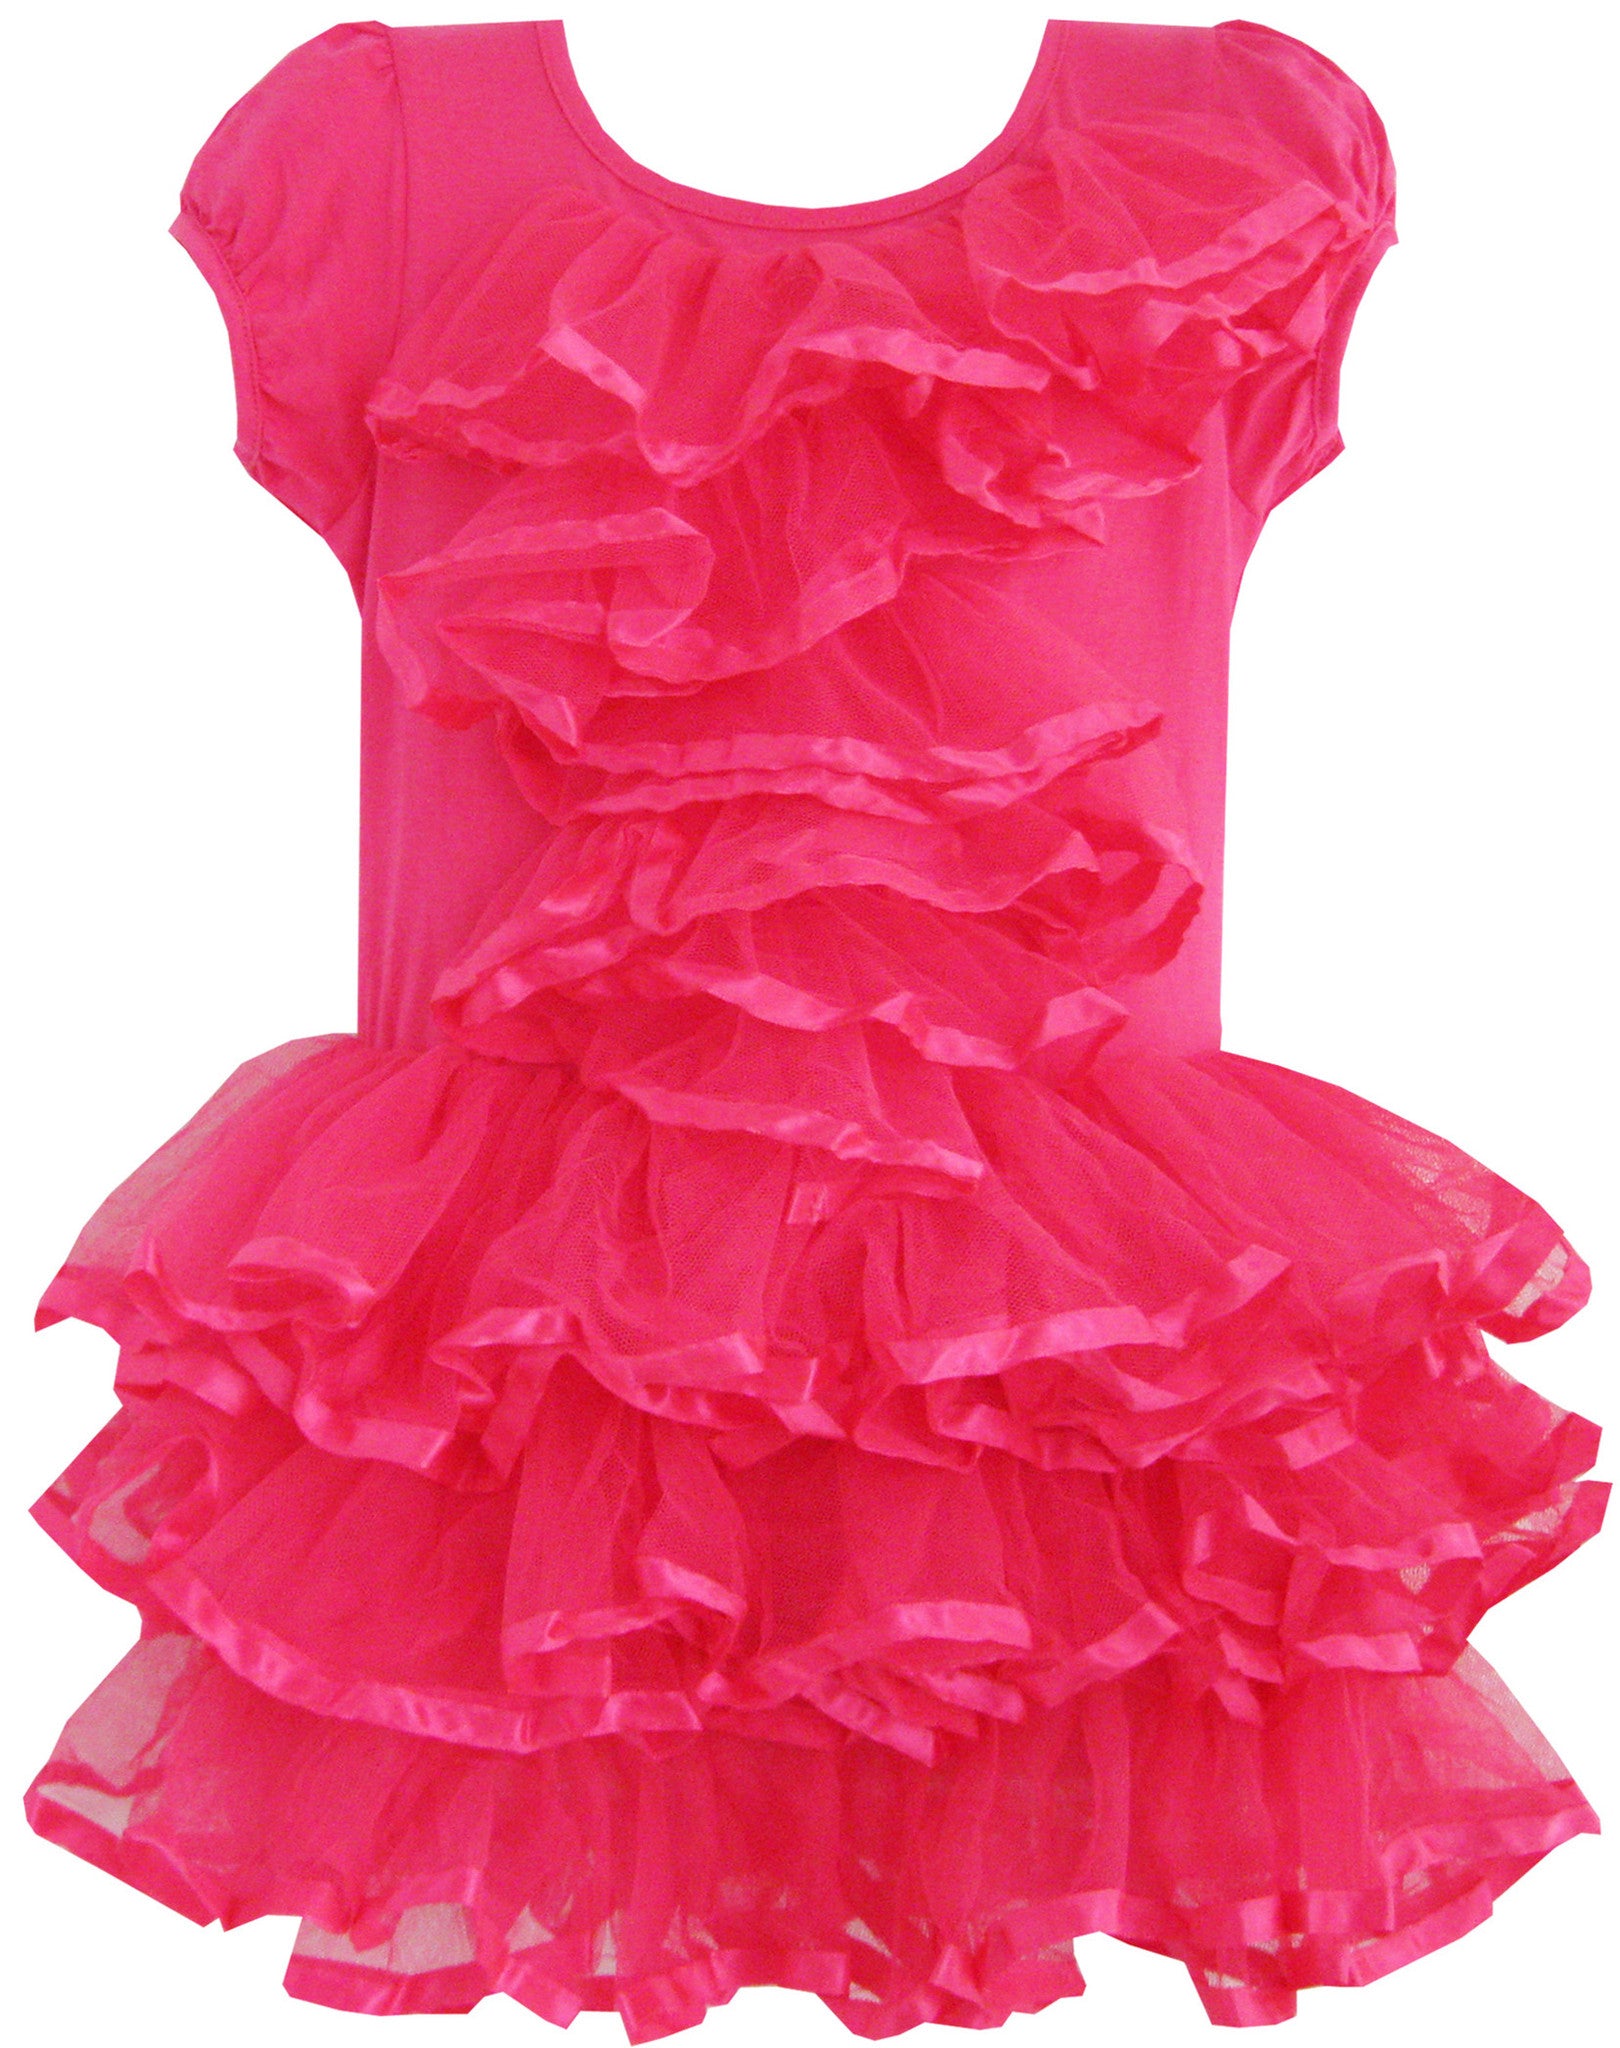 Girls Dress Butterfly Tutu Dance Pageant Party Sunny Fashion 